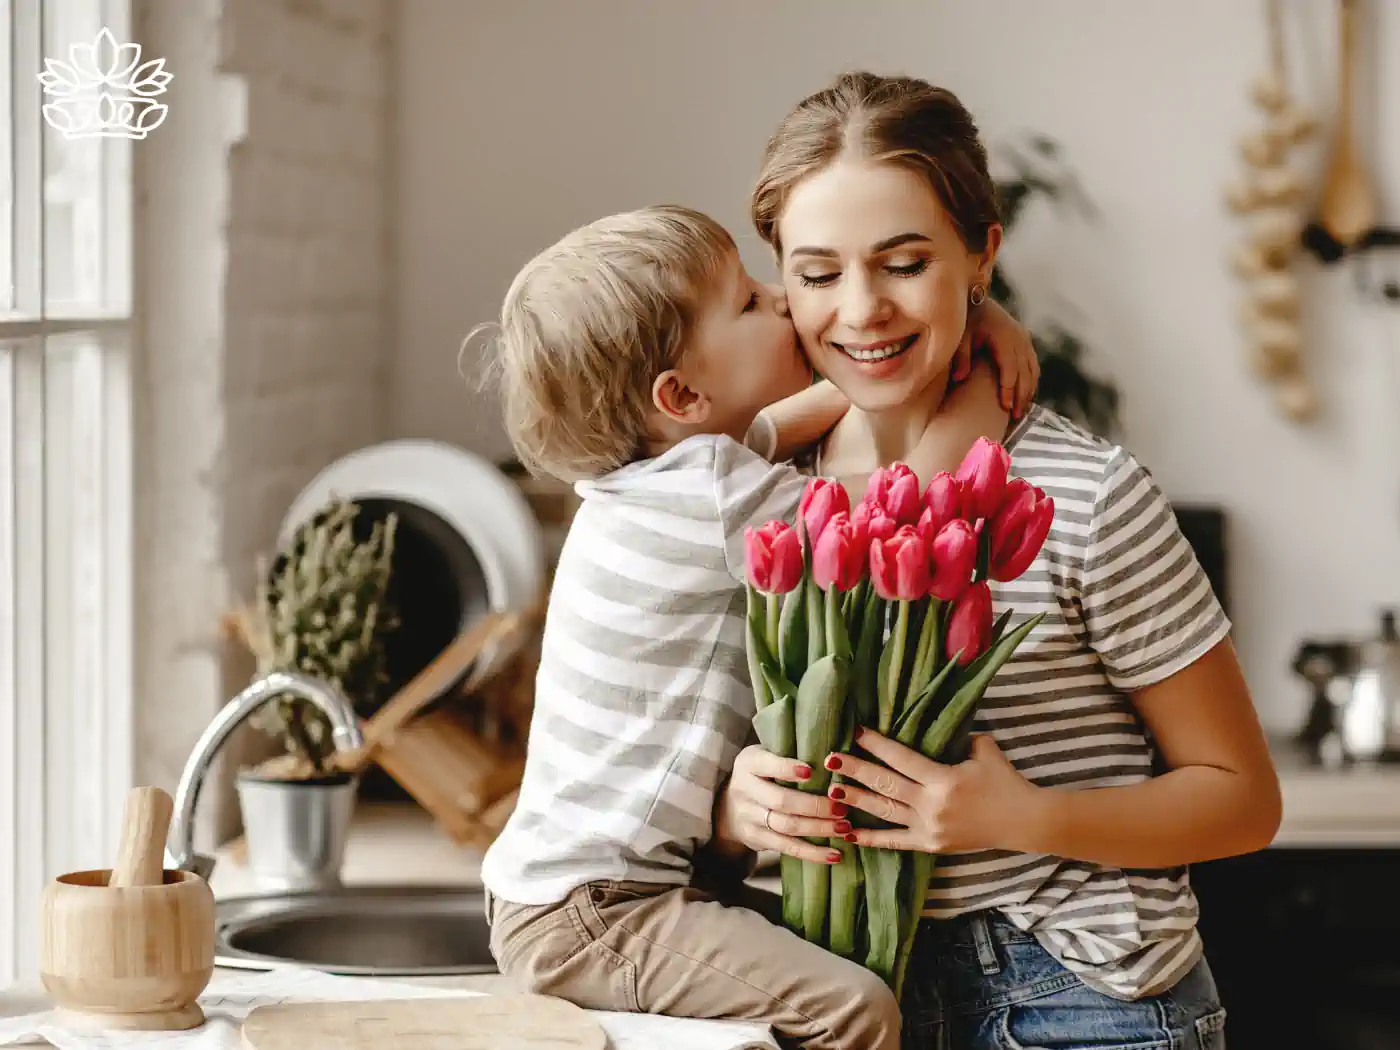 Image of a young boy kissing his mother's cheek while she holds a bouquet of tulips in the kitchen. Fabulous Flowers and Gifts - Luxury Flower Bouquets.